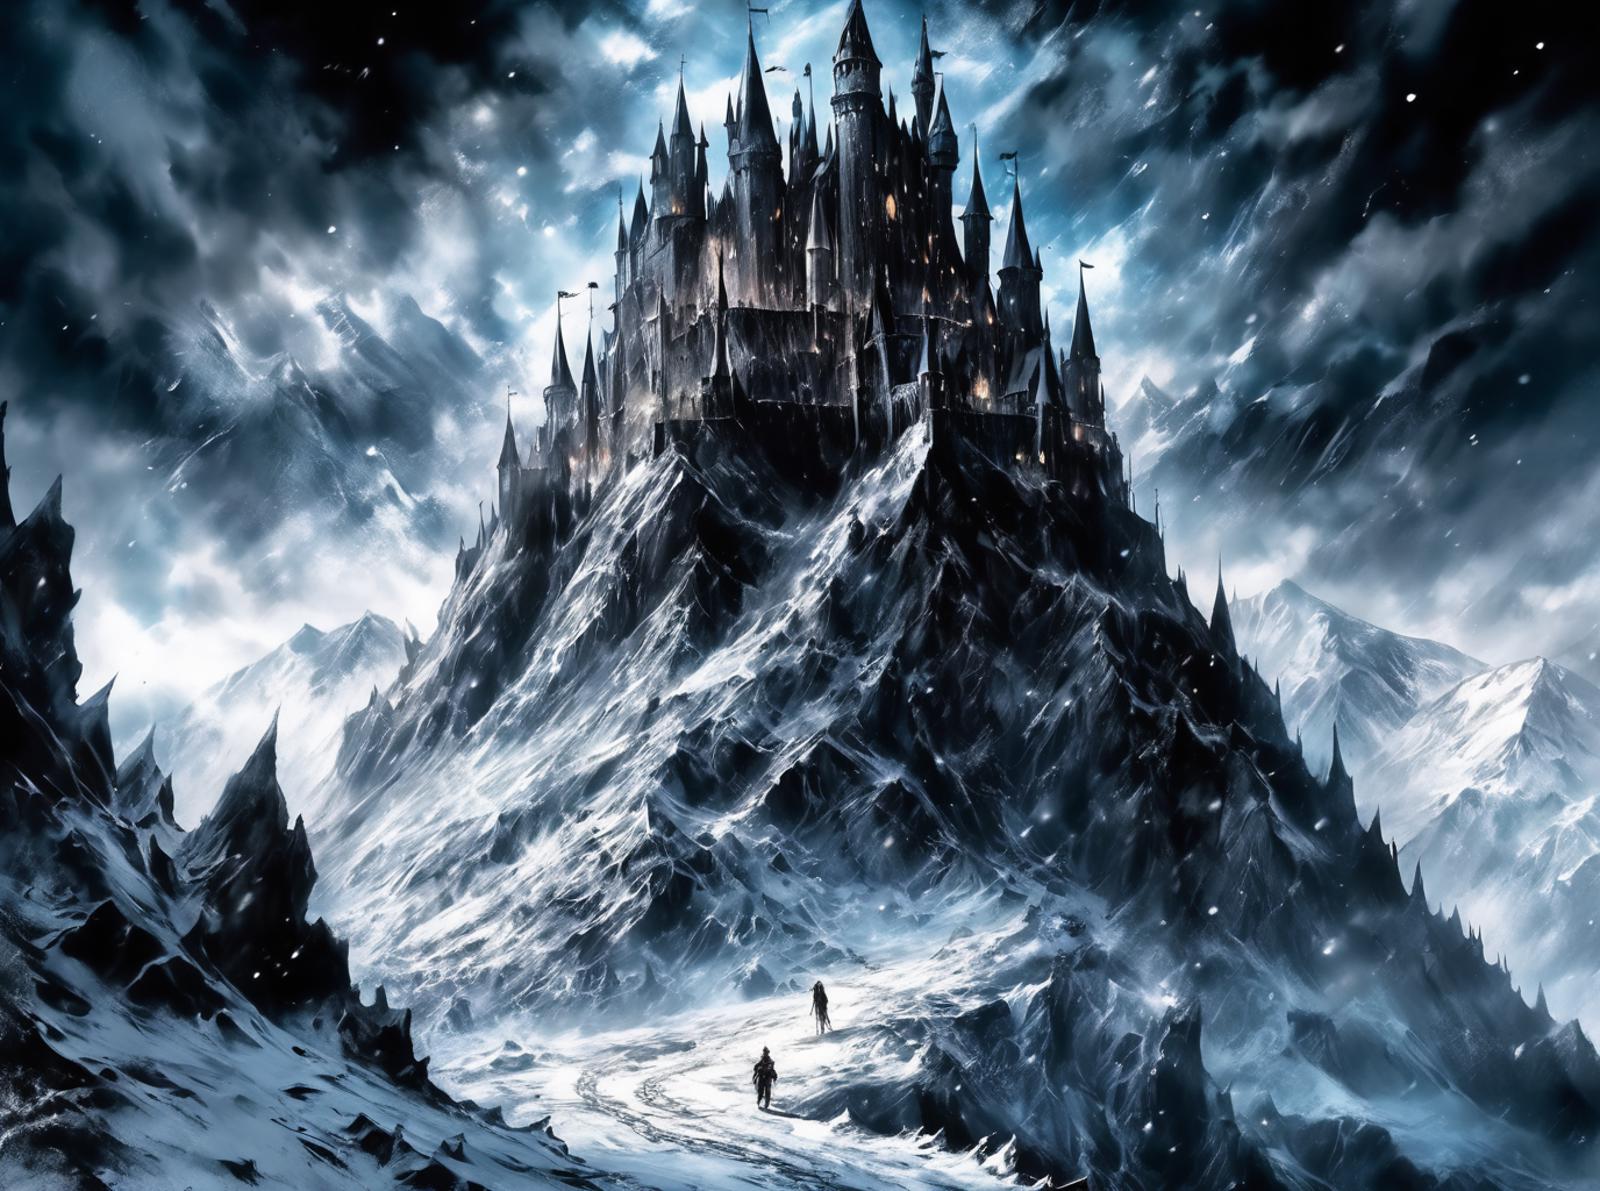 A Castle in the Snowy Mountains at Night